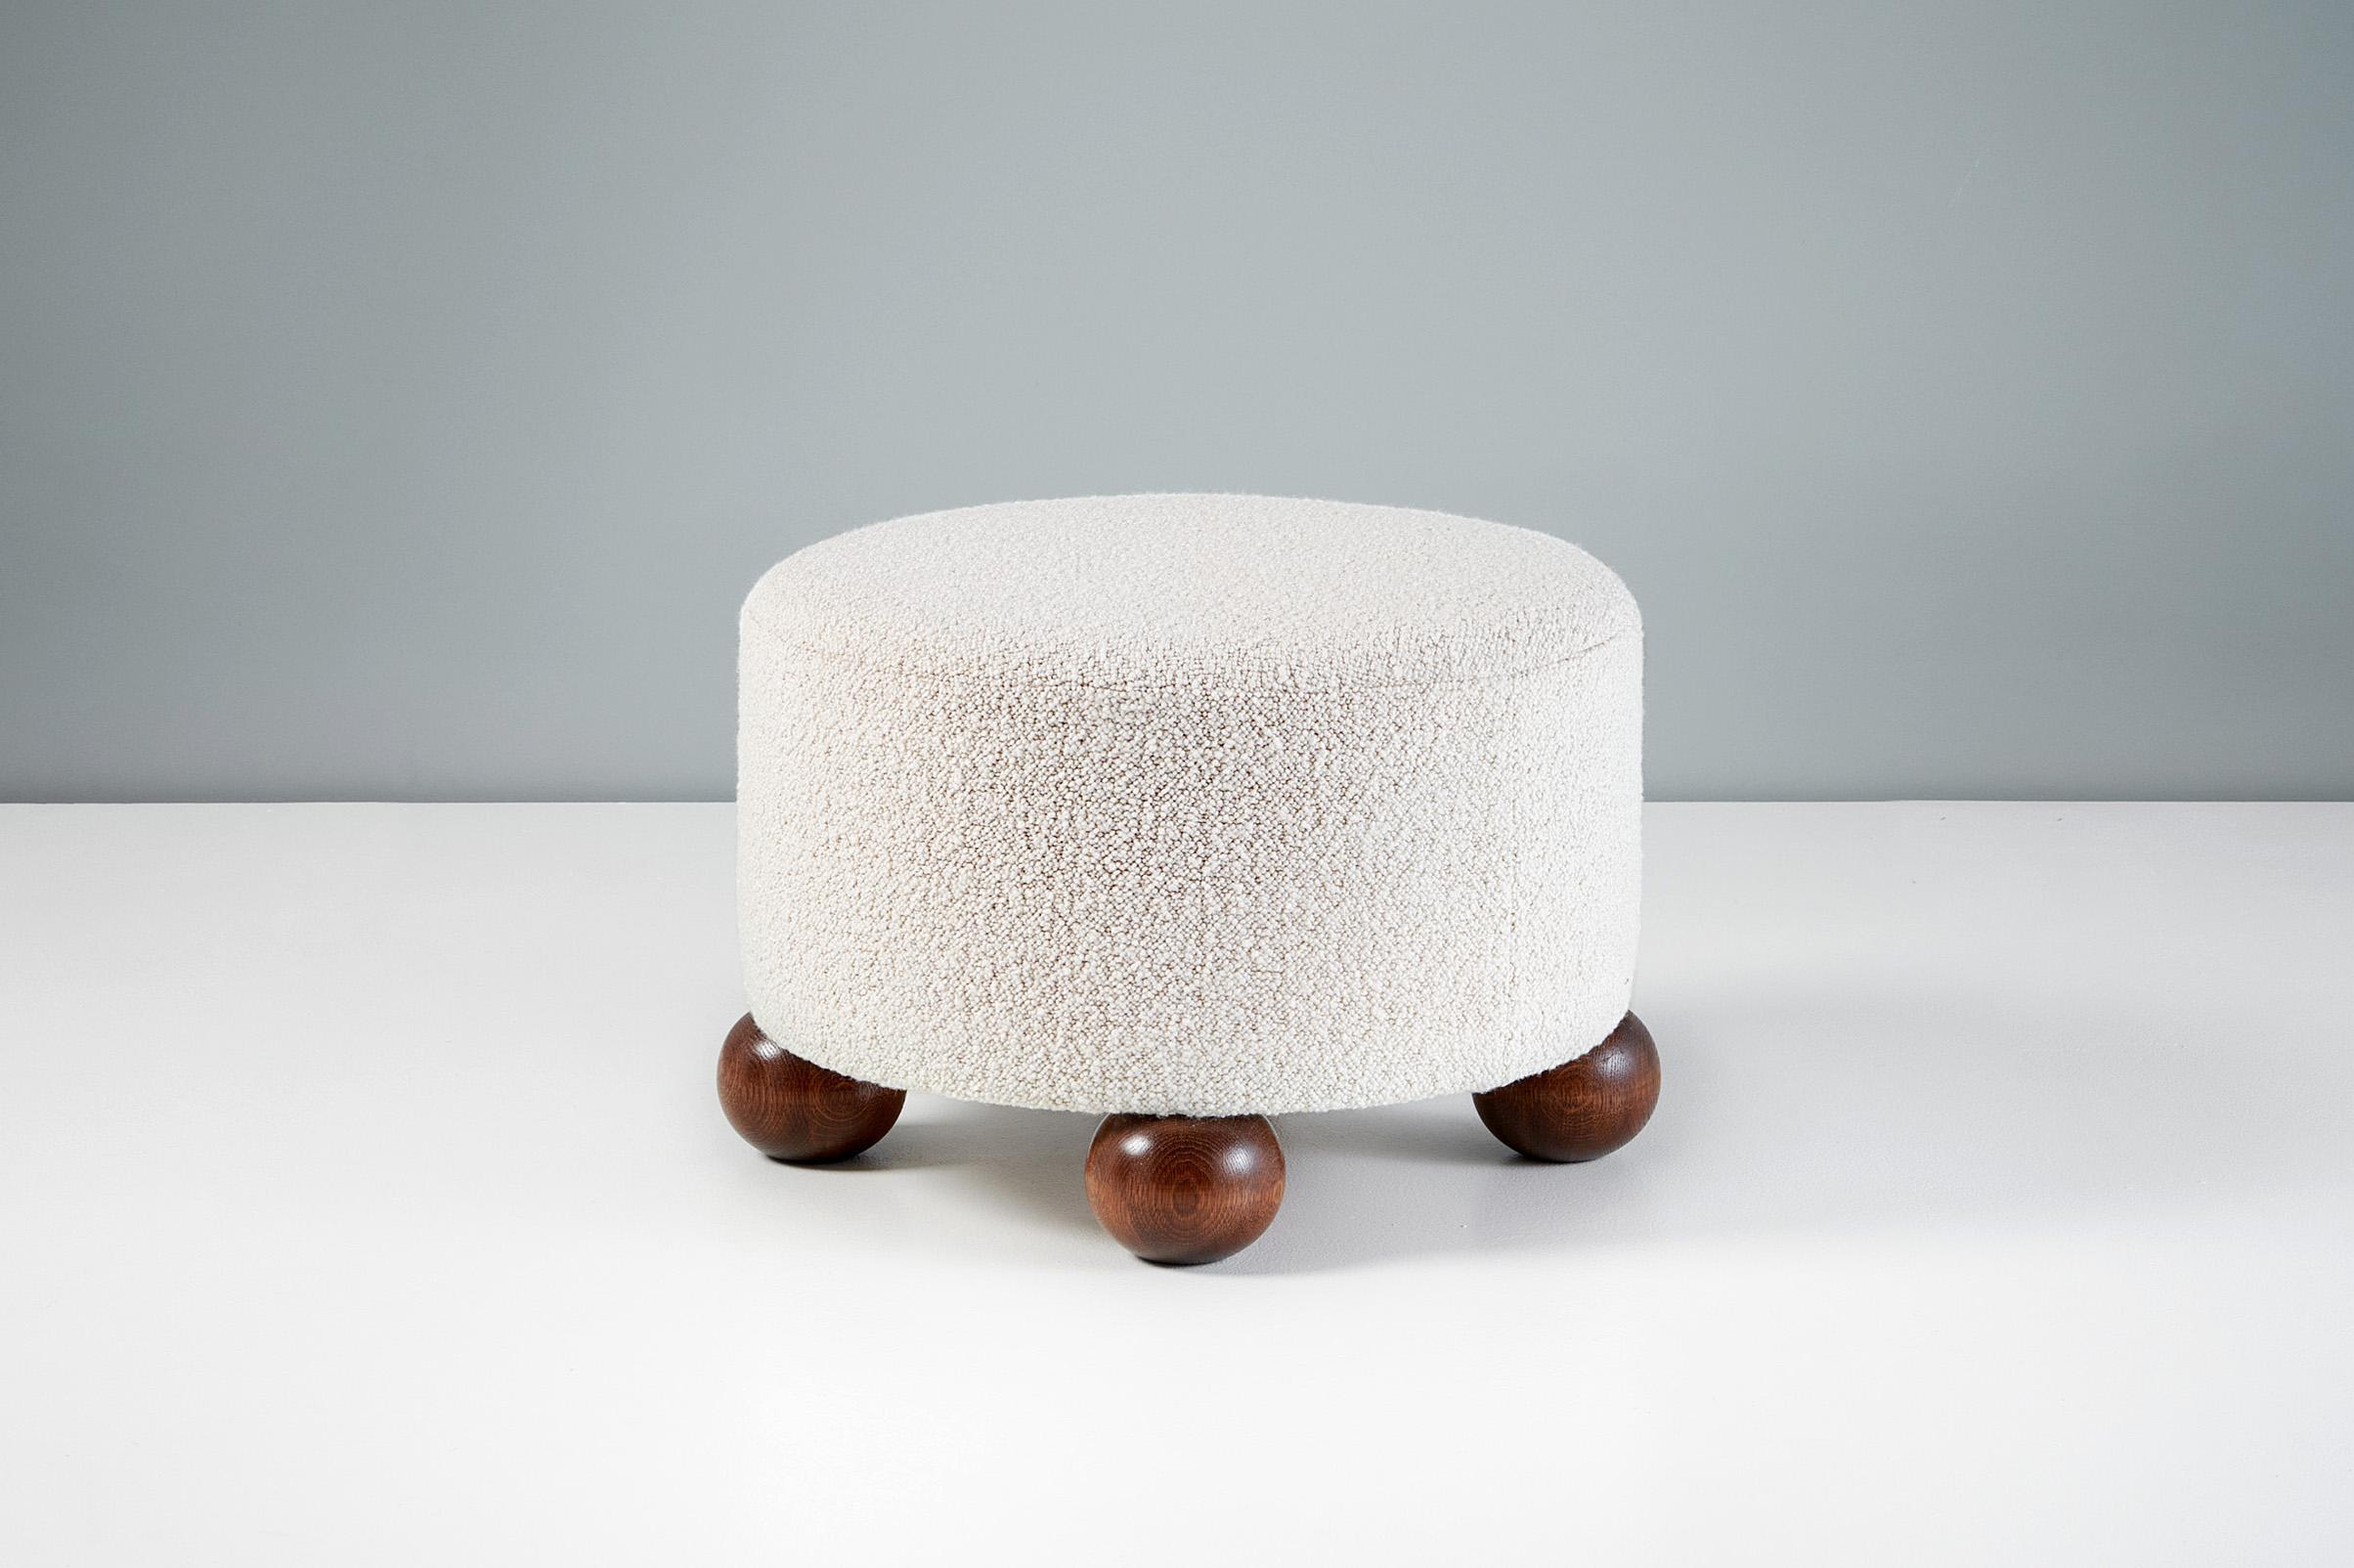 Dagmar - Luupo Round Ottoman

Custom-made ottoman developed & produced at our workshops in London using the highest quality materials. This example is upholstered in Karakorum 'Ecume' boucle fabric by Dedar Milan and has fumed oak ball feet. This